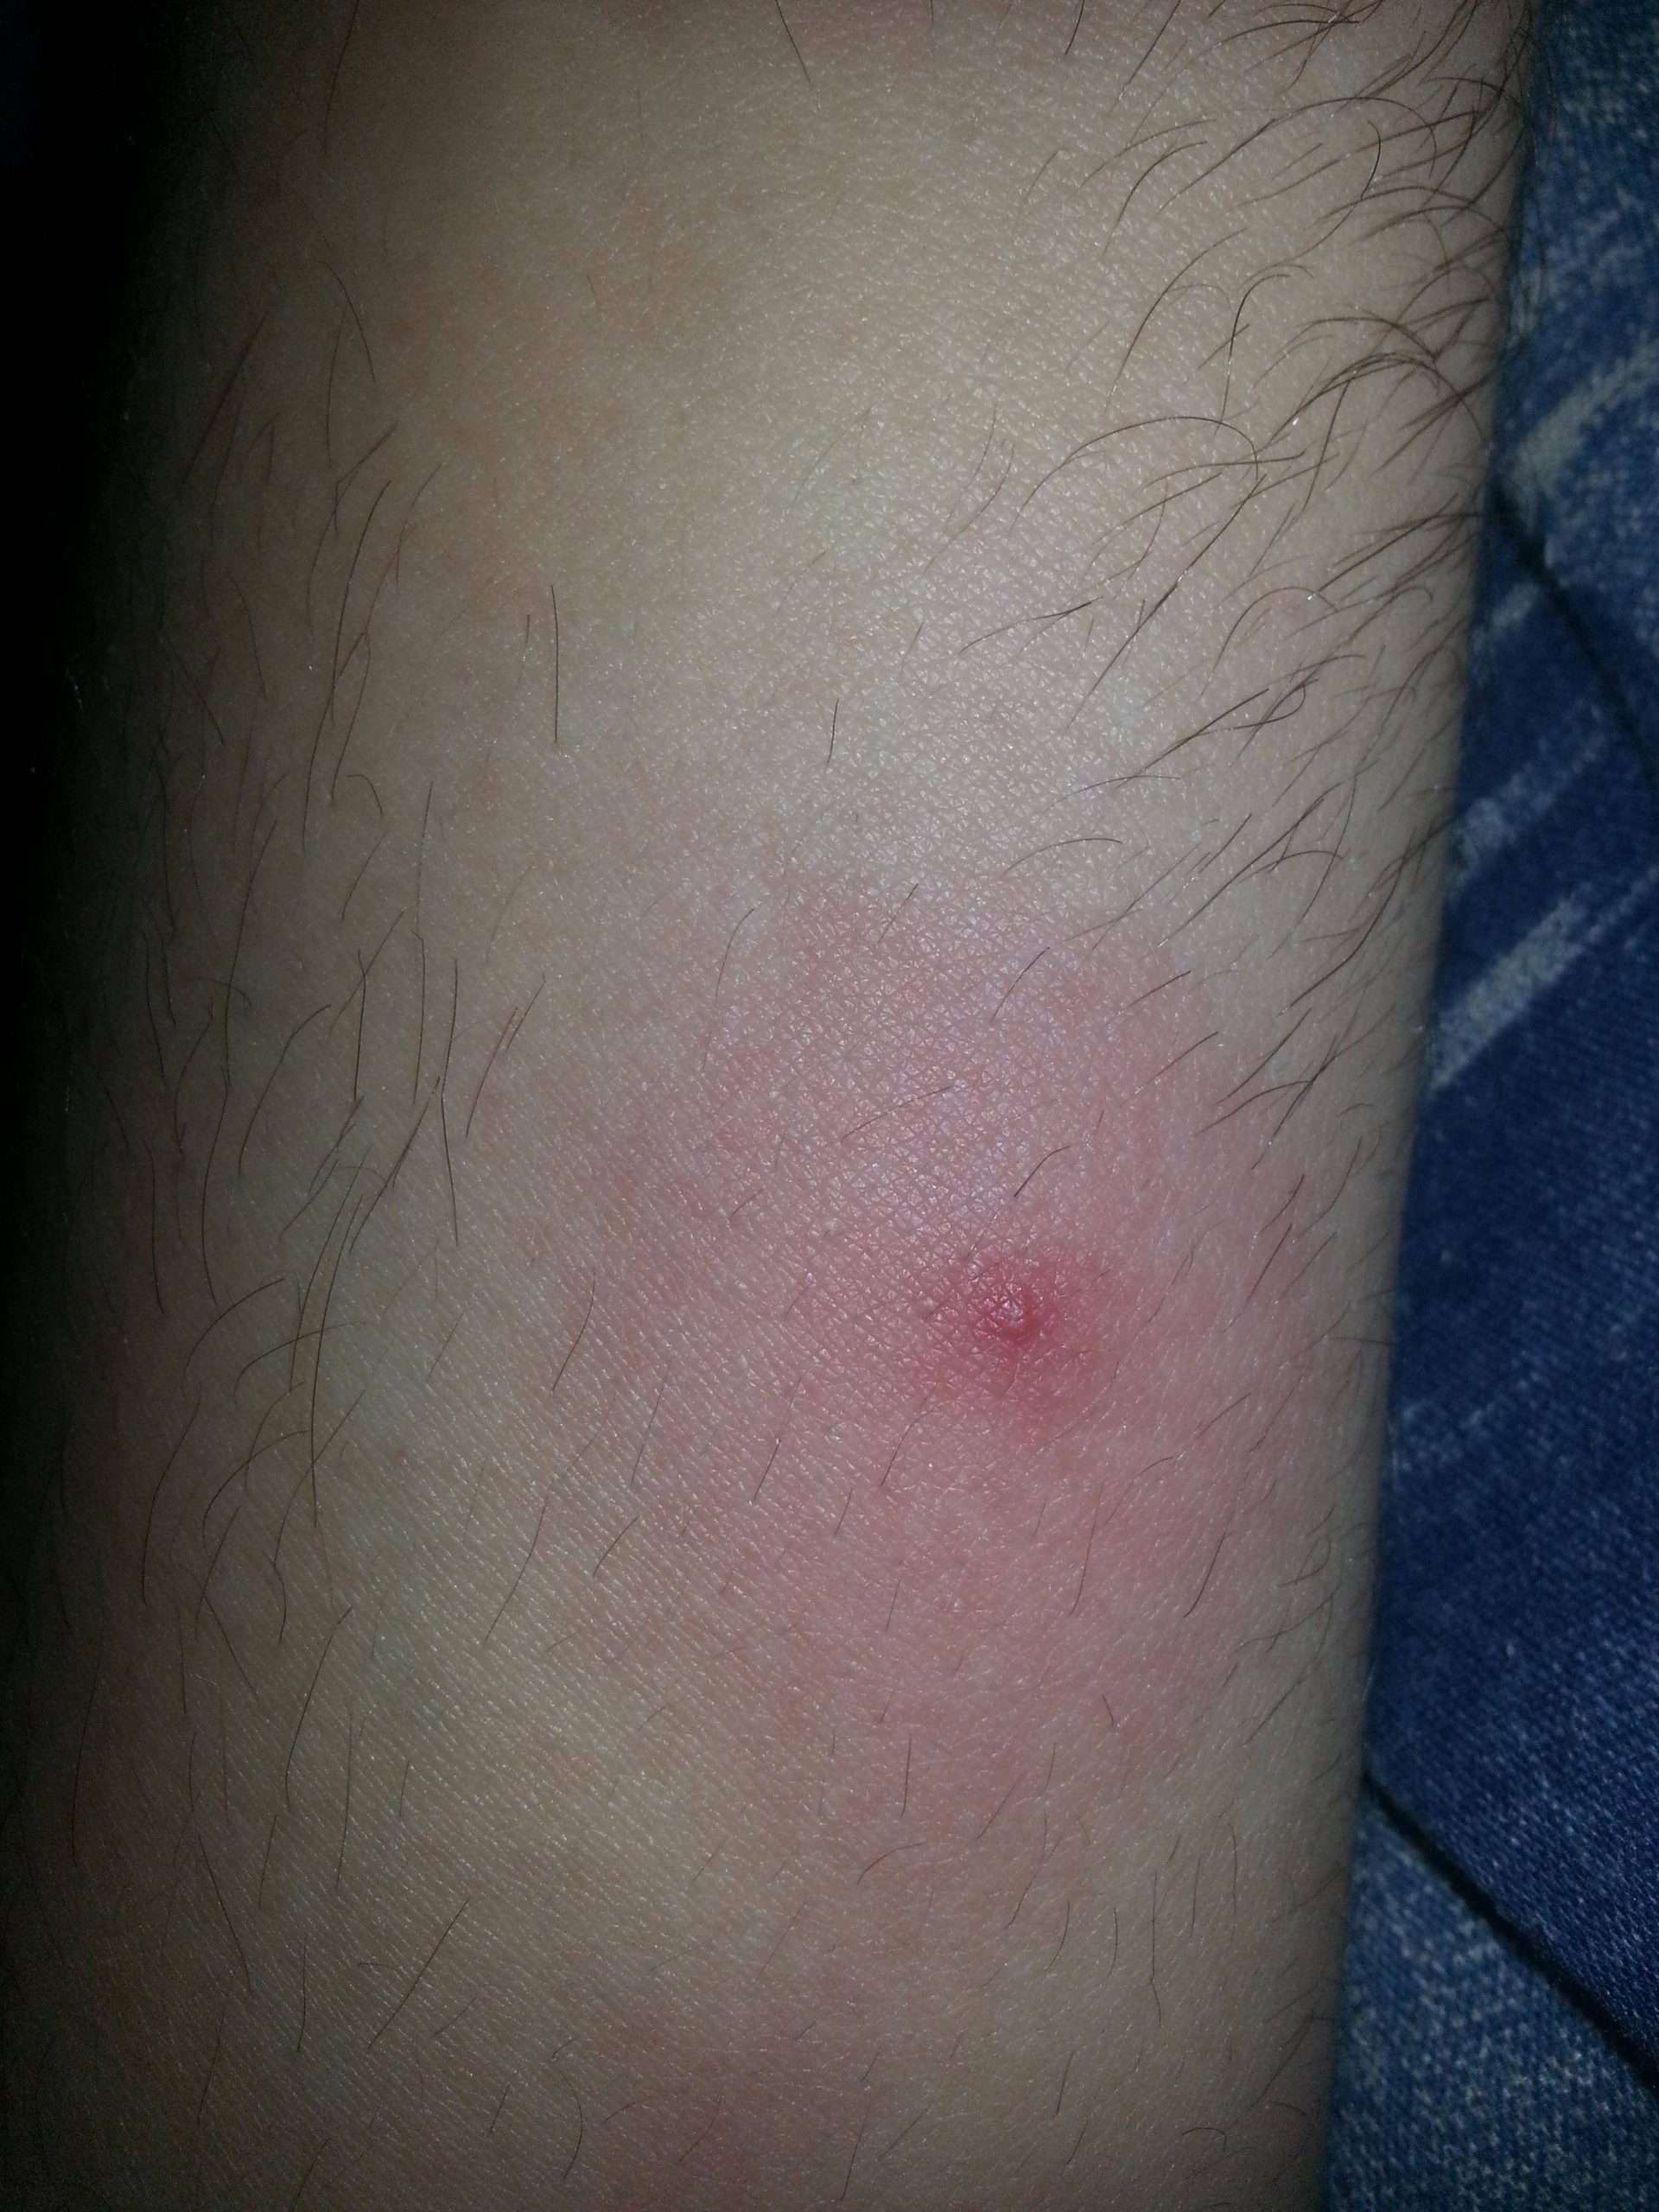 Live in RI, worried about lyme disease after getting bit ...